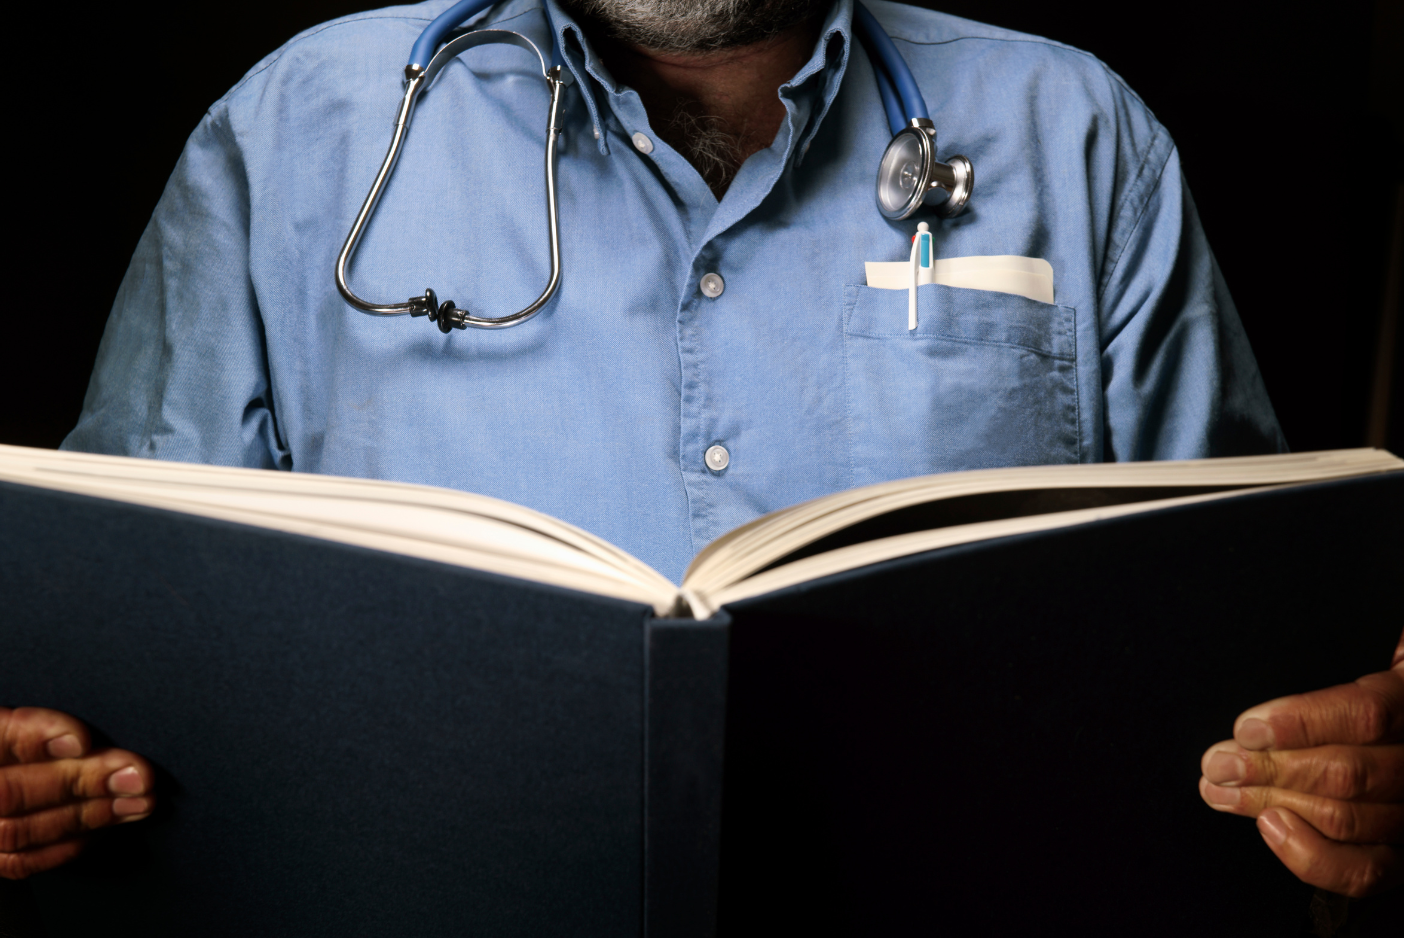 A doctor looking at a book for reference